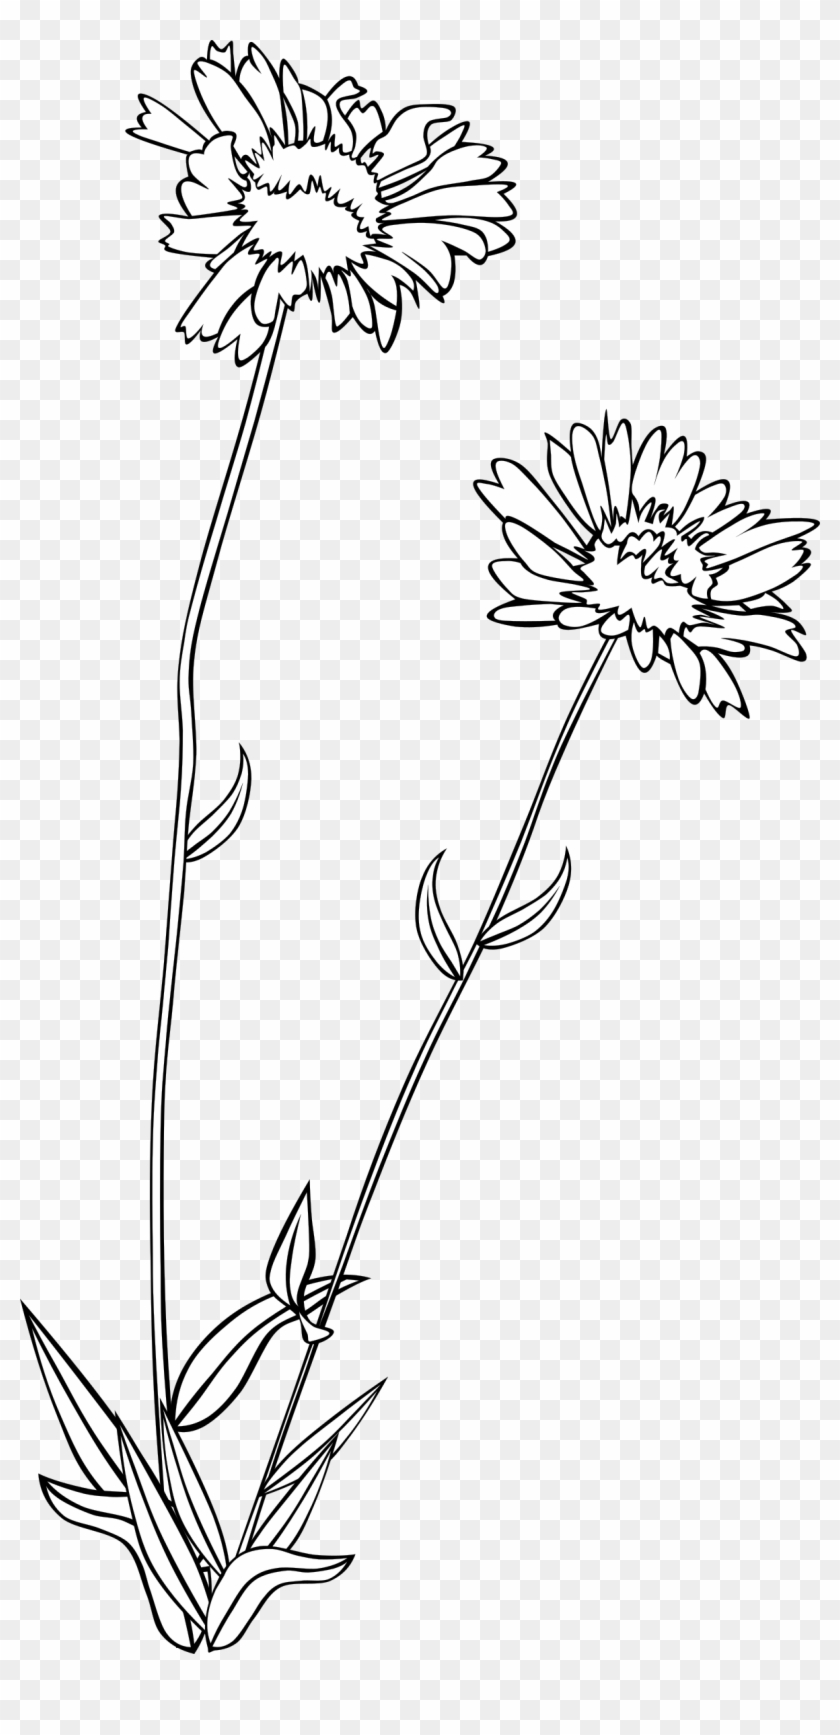 Big Image - Black And White Wildflower Clipart #631329